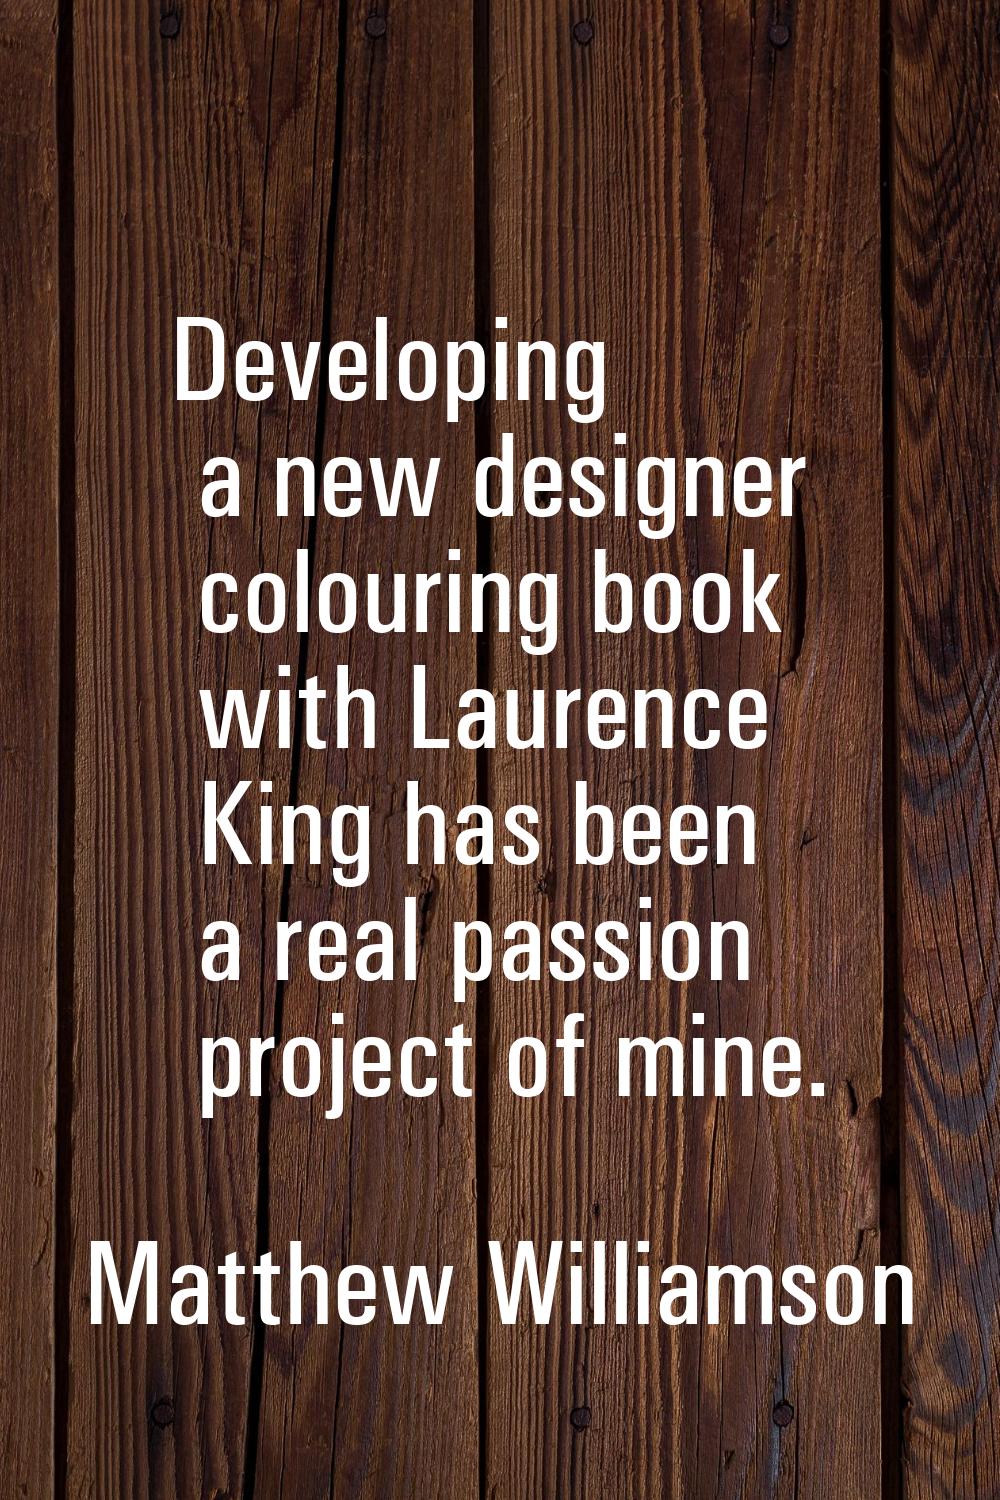 Developing a new designer colouring book with Laurence King has been a real passion project of mine